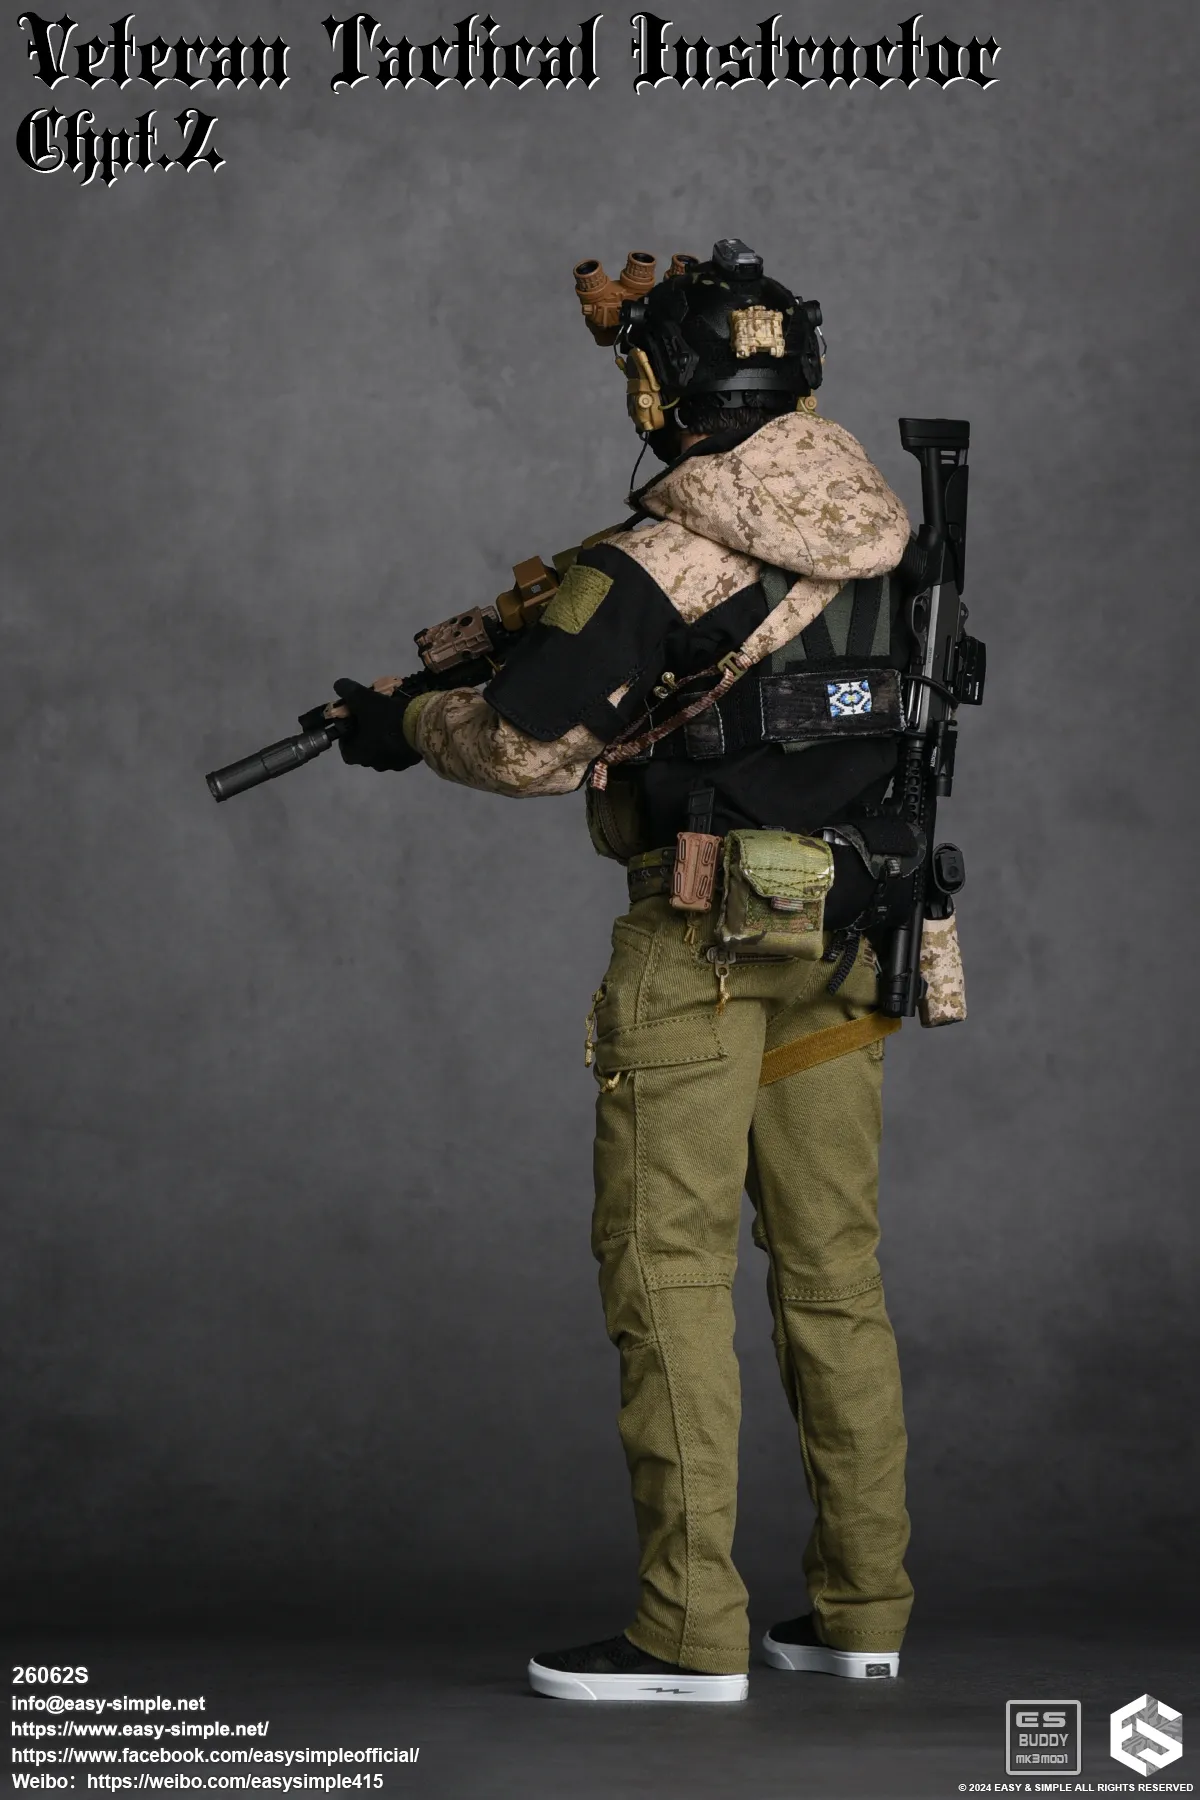 NEW PRODUCT: Easy & Simple Veteran Tactical Instructor Chapter II 26062S